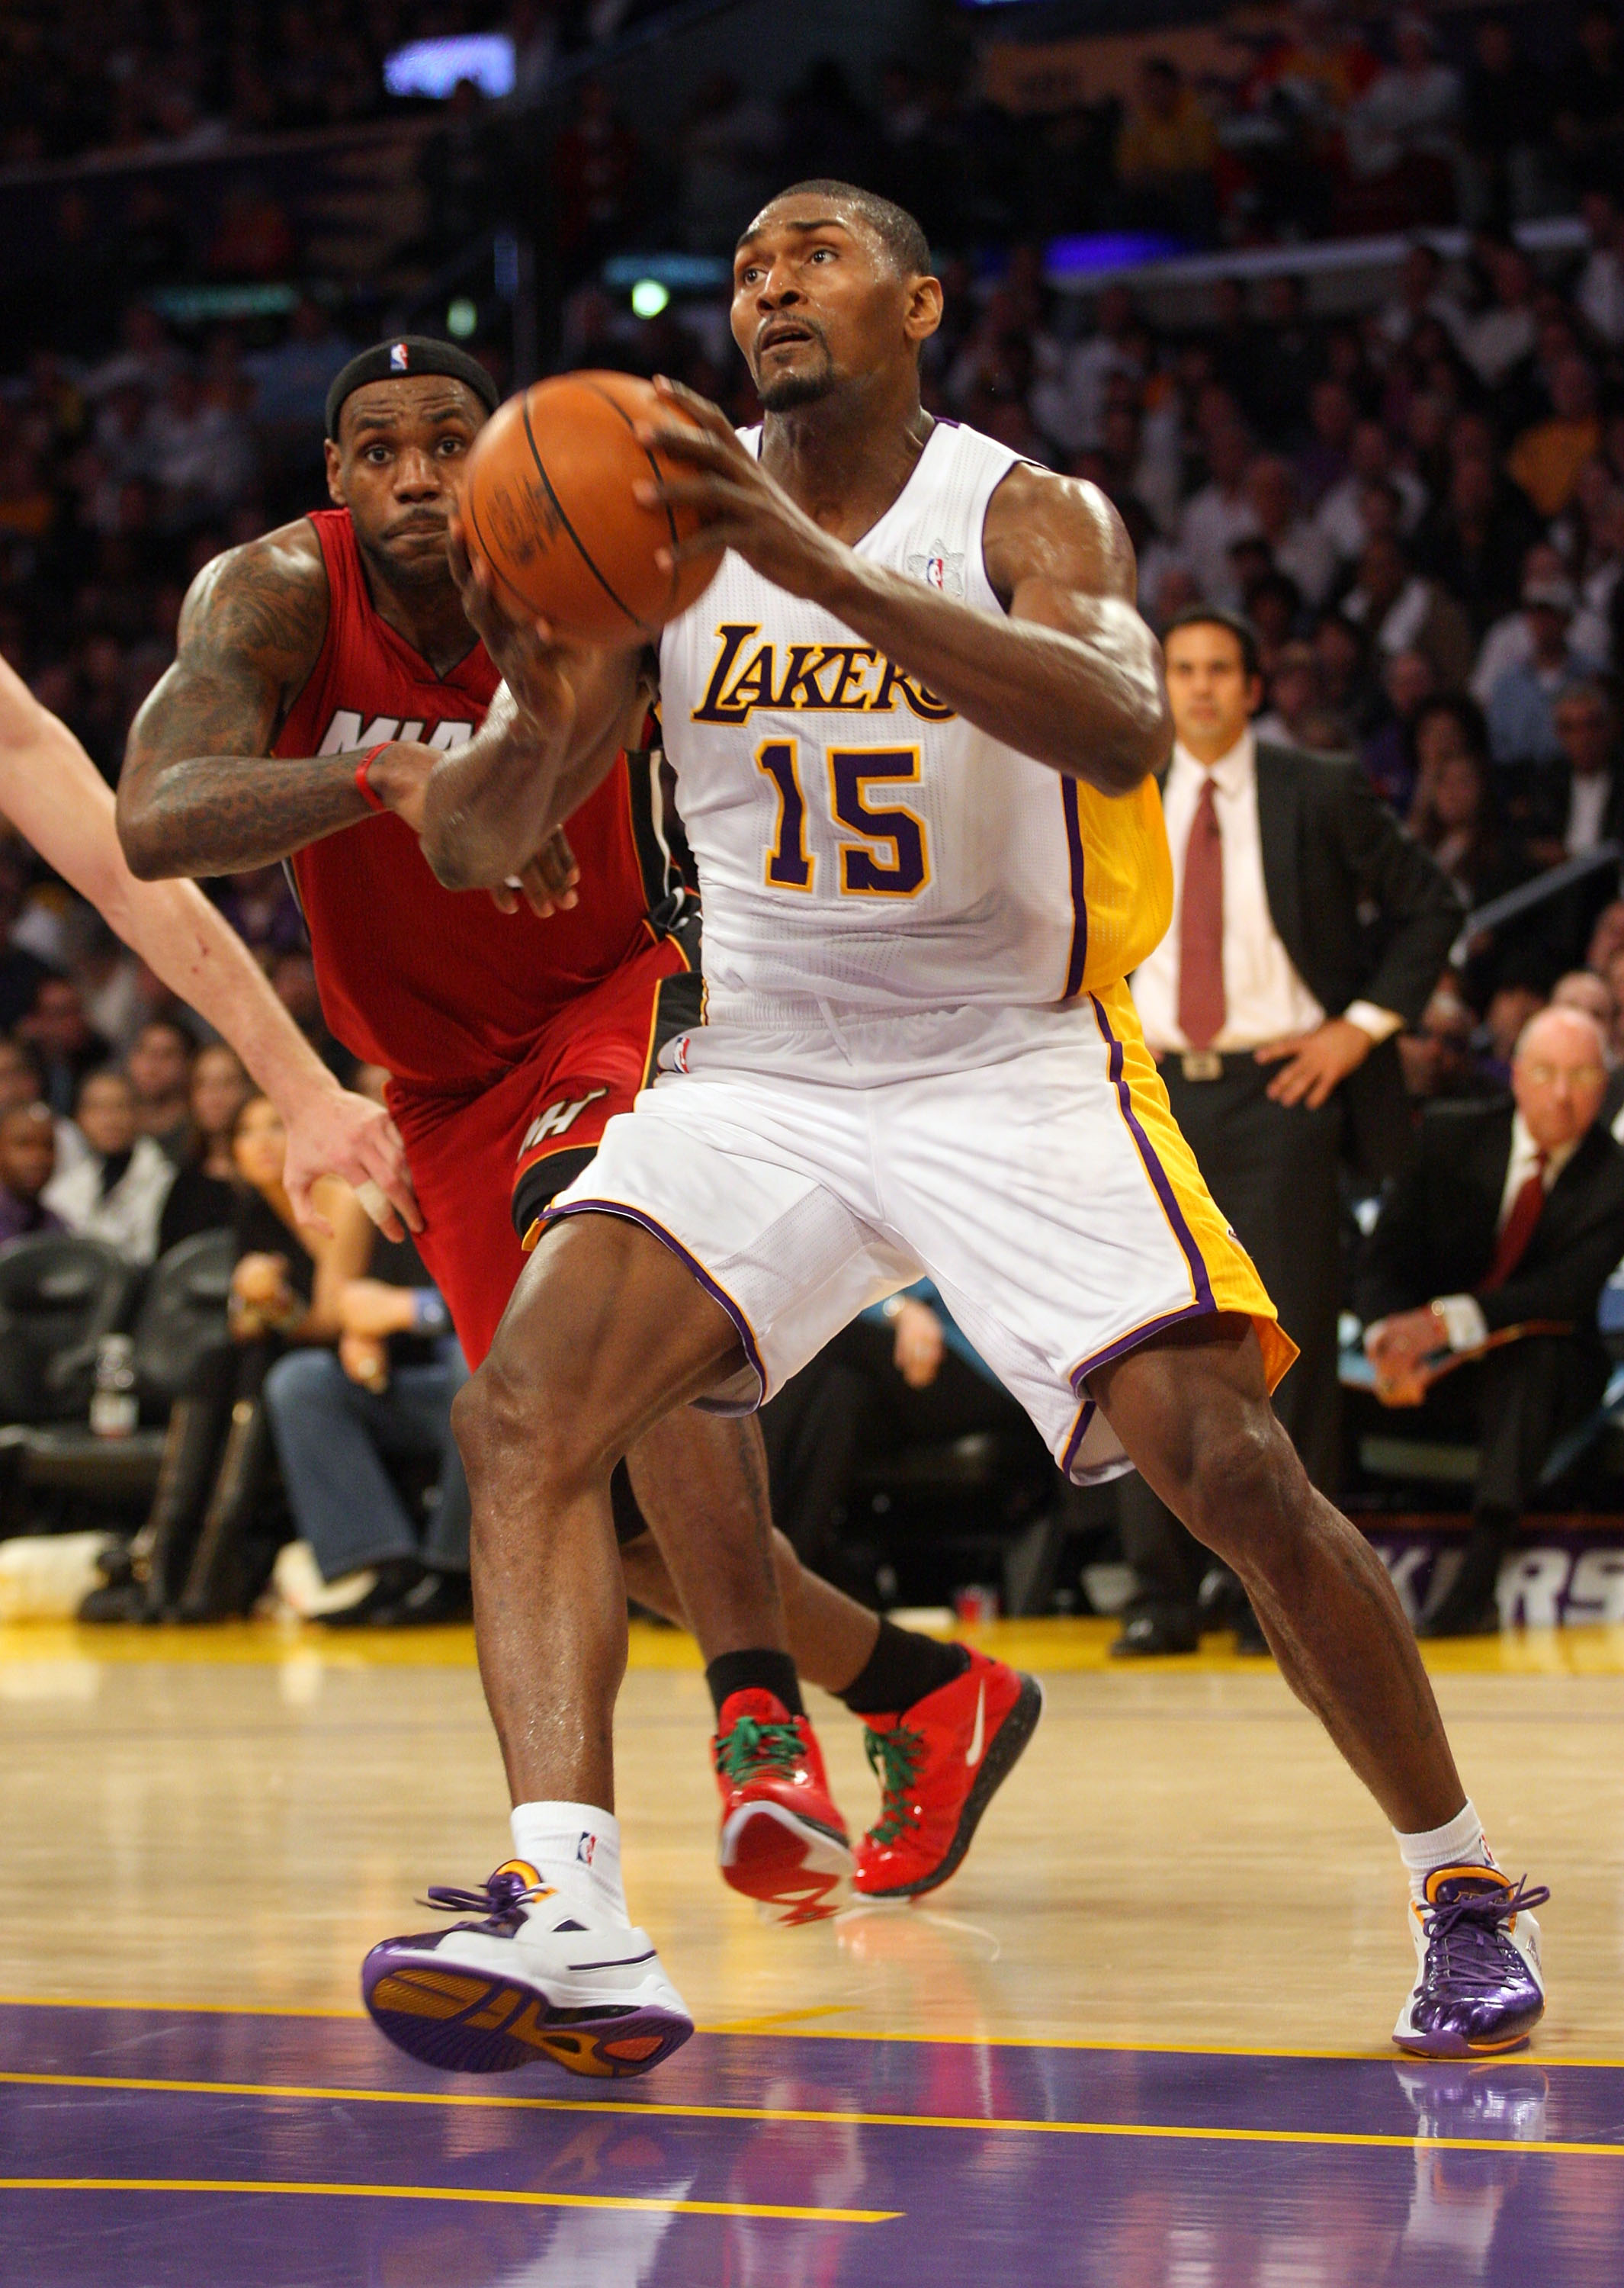 LOS ANGELES, CA - DECEMBER 25:  Ron Artest #15 of the Los Angeles Lakers steps to the basket as LeBron James #6 of the Miami Heat tries to defend the play during the NBA game at Staples Center on December 25, 2010 in Los Angeles, California. The Heat defe